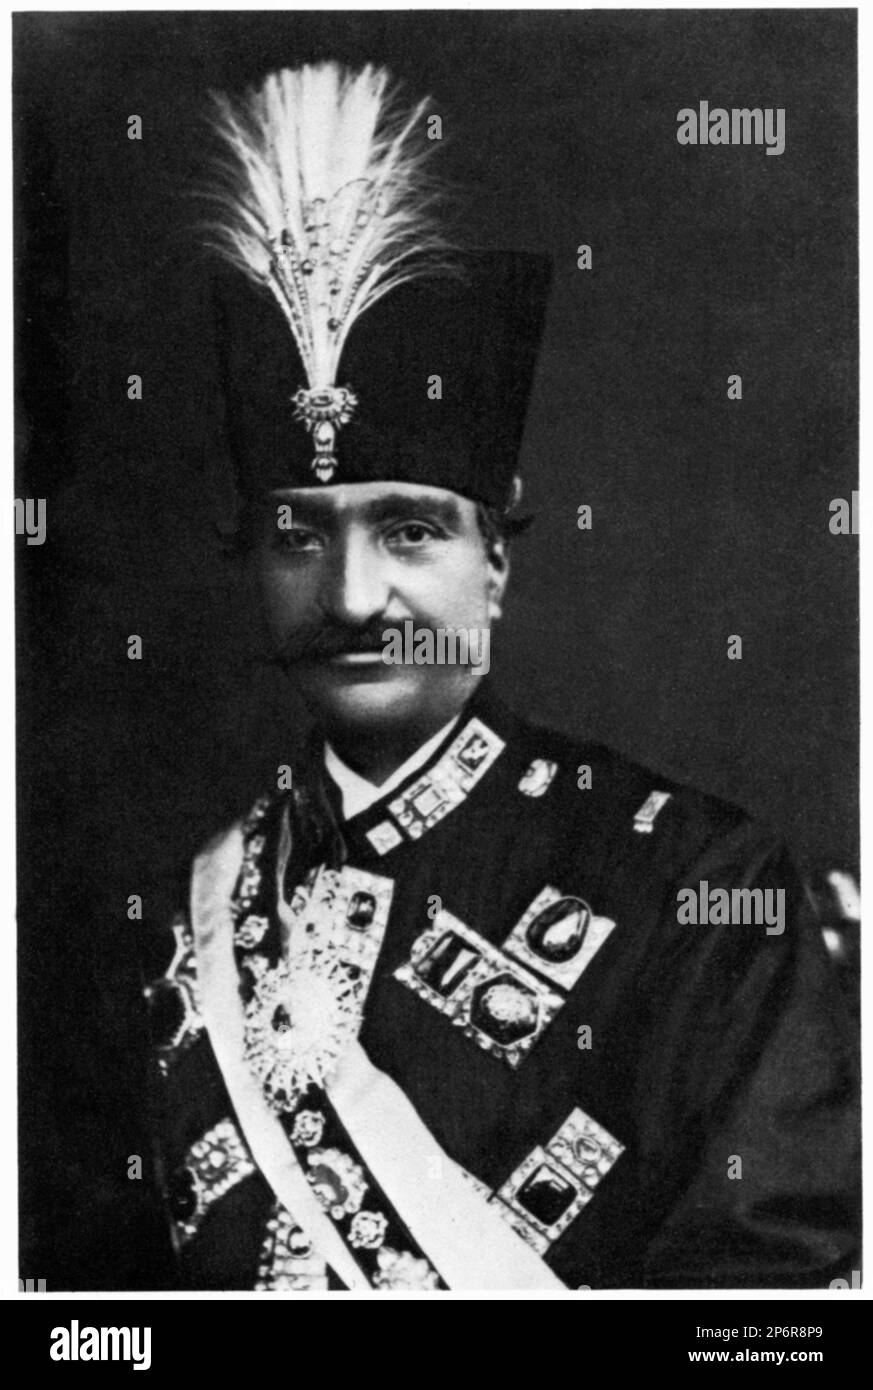 1873 c, FRANCE : The King of Iran NASIR AD-DIN Qajar  ( 1831 - 1896 ) was the Shah of Persia from September 17, 1848 until his death on May 1, 1896. He was a son of Mohammad Shah Qajar. . Photo by Nadar , Paris , France - PERSIA - RE - POLITICO - POLITICA - POLITIC  - foto storiche - foto storica - portrait - ritratto  - baffi - moustache - hat - cappello - piume - feathers  - nobility - nobiltà - royalty - reali ---- Archivio GBB Stock Photo